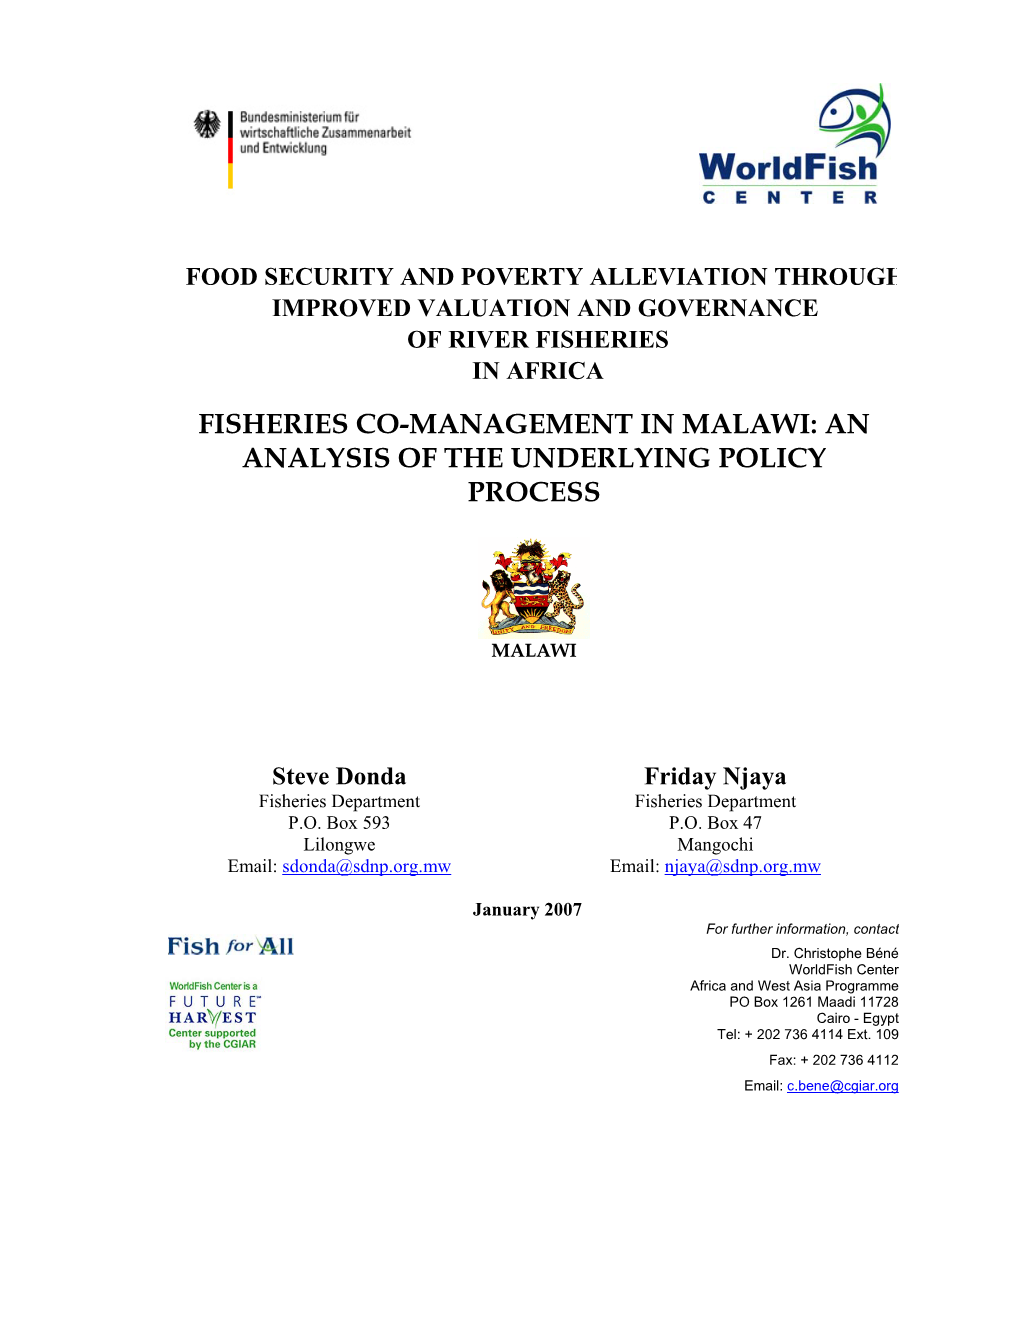 Fisheries Co-Management in Malawi: an Analysis of the Underlying Policy Process